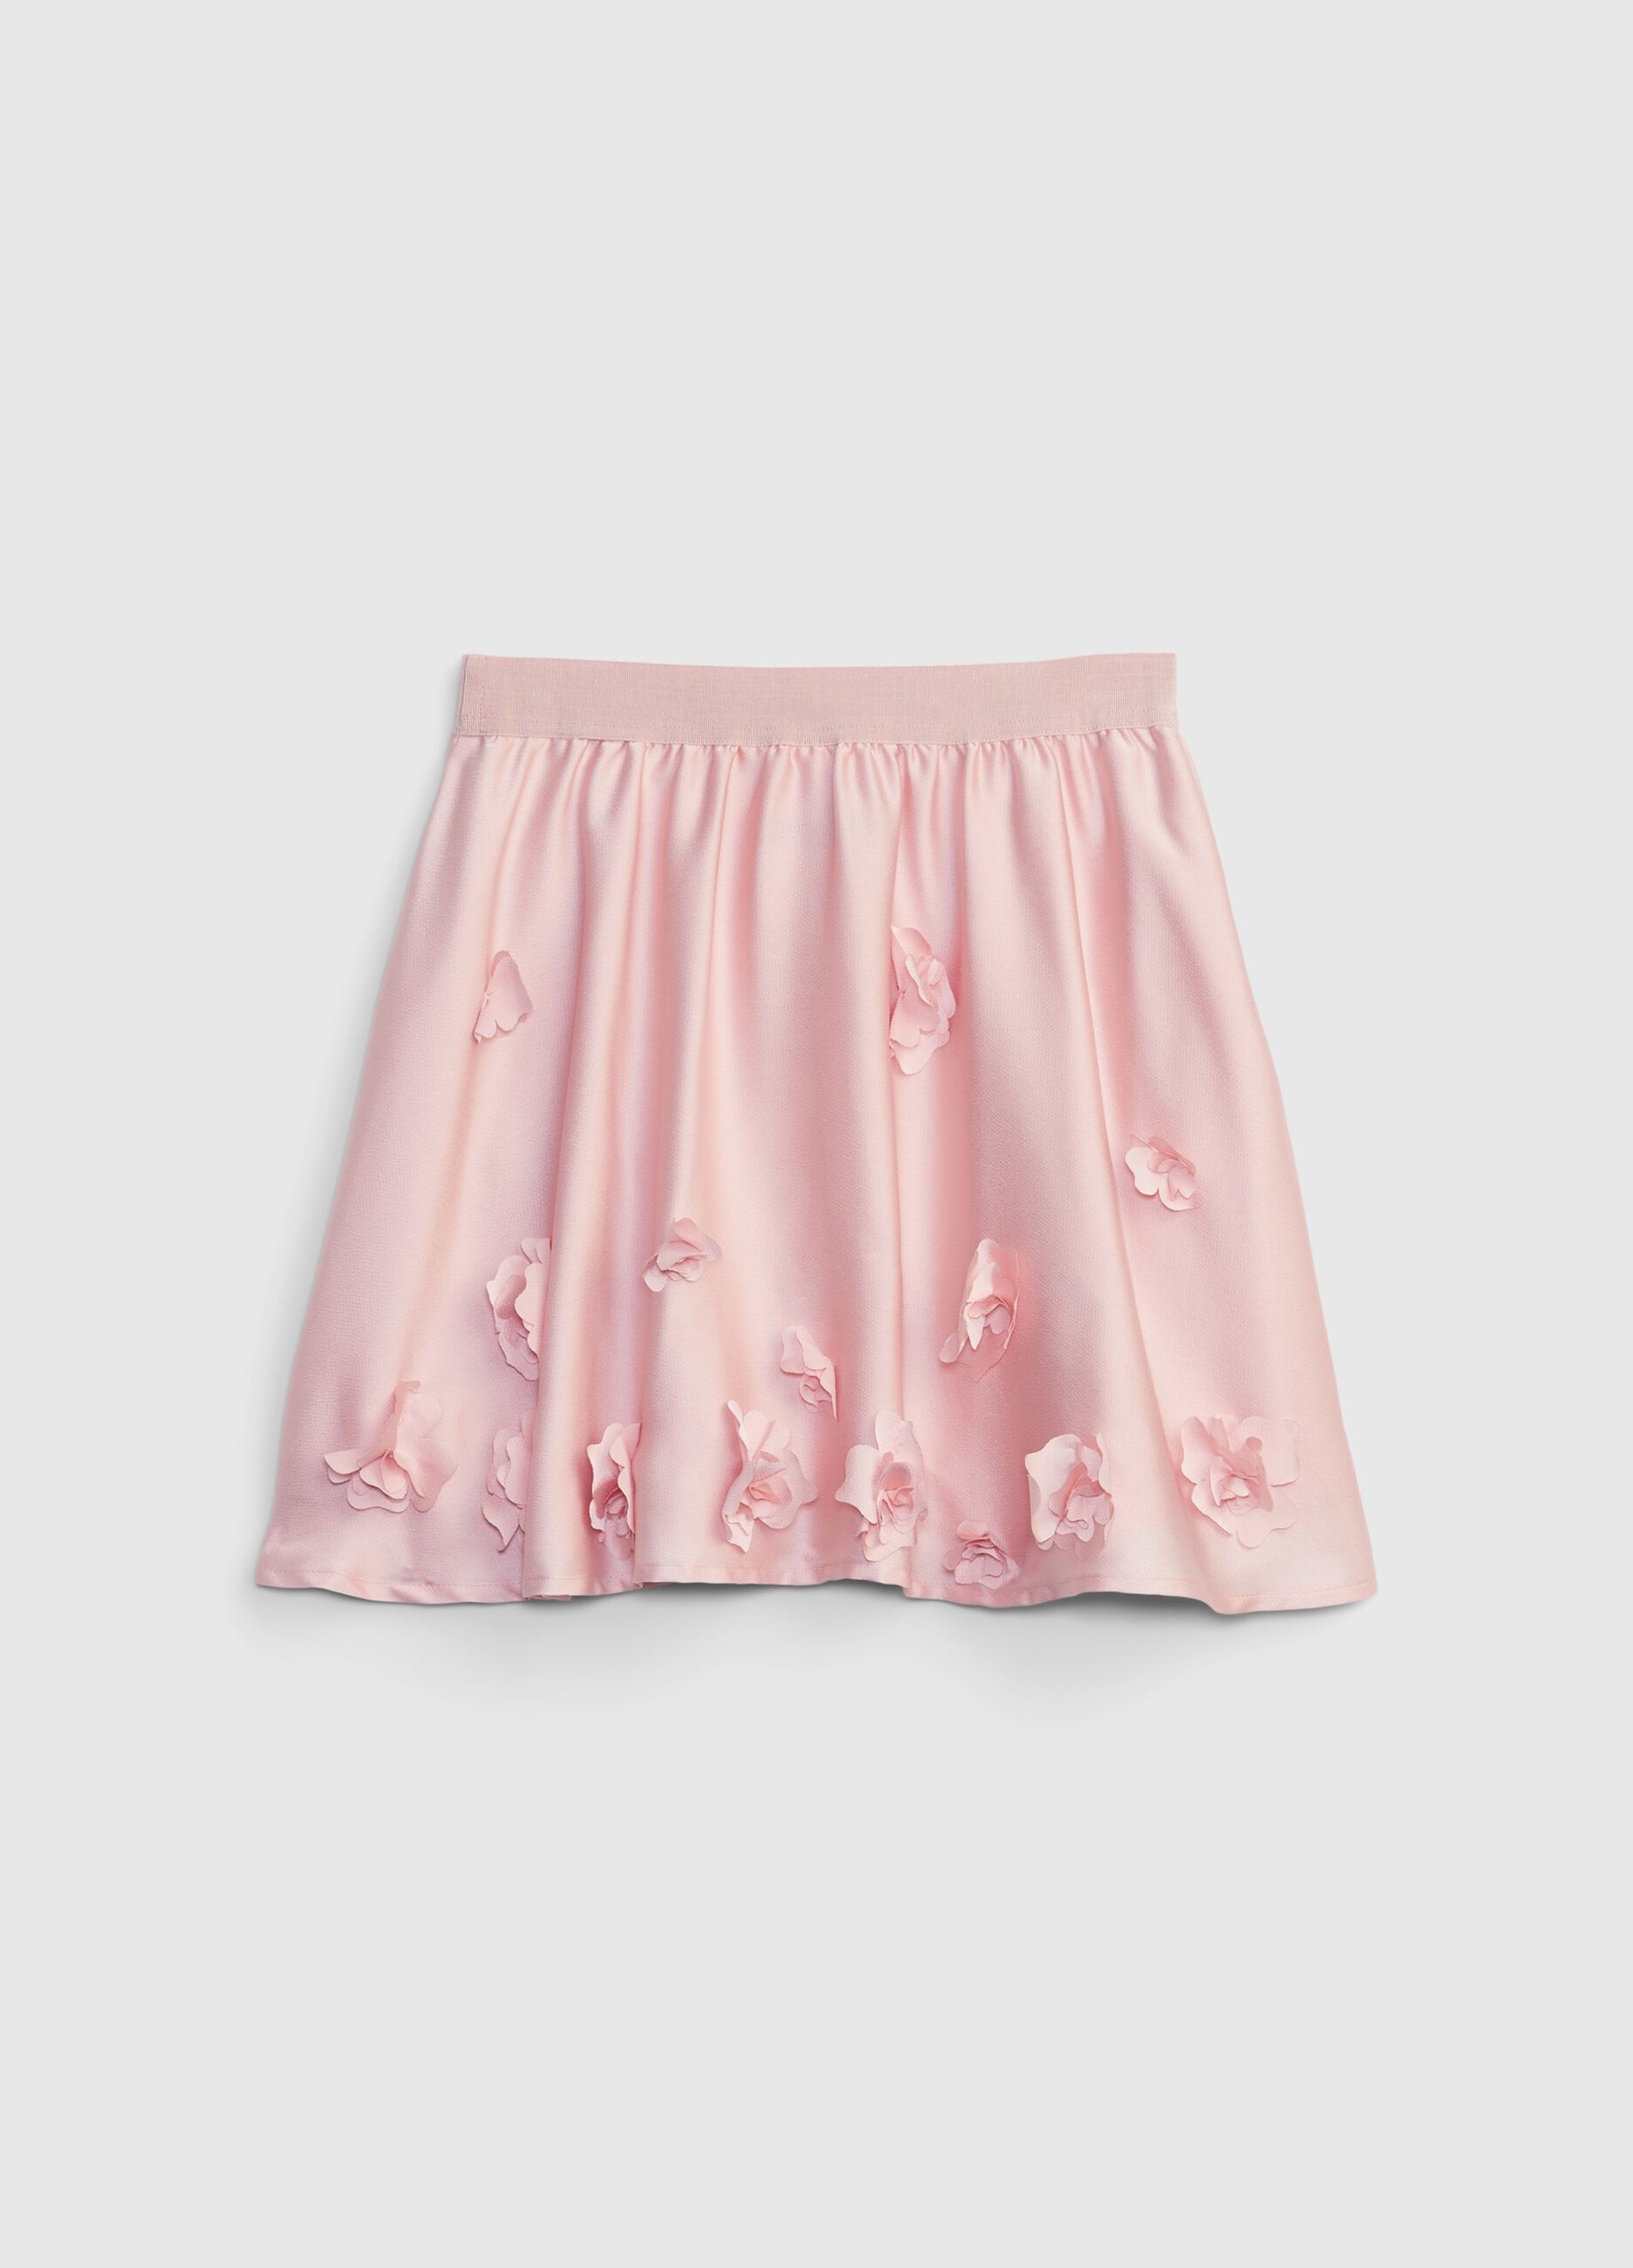 Short skirt in satin with flowers_1